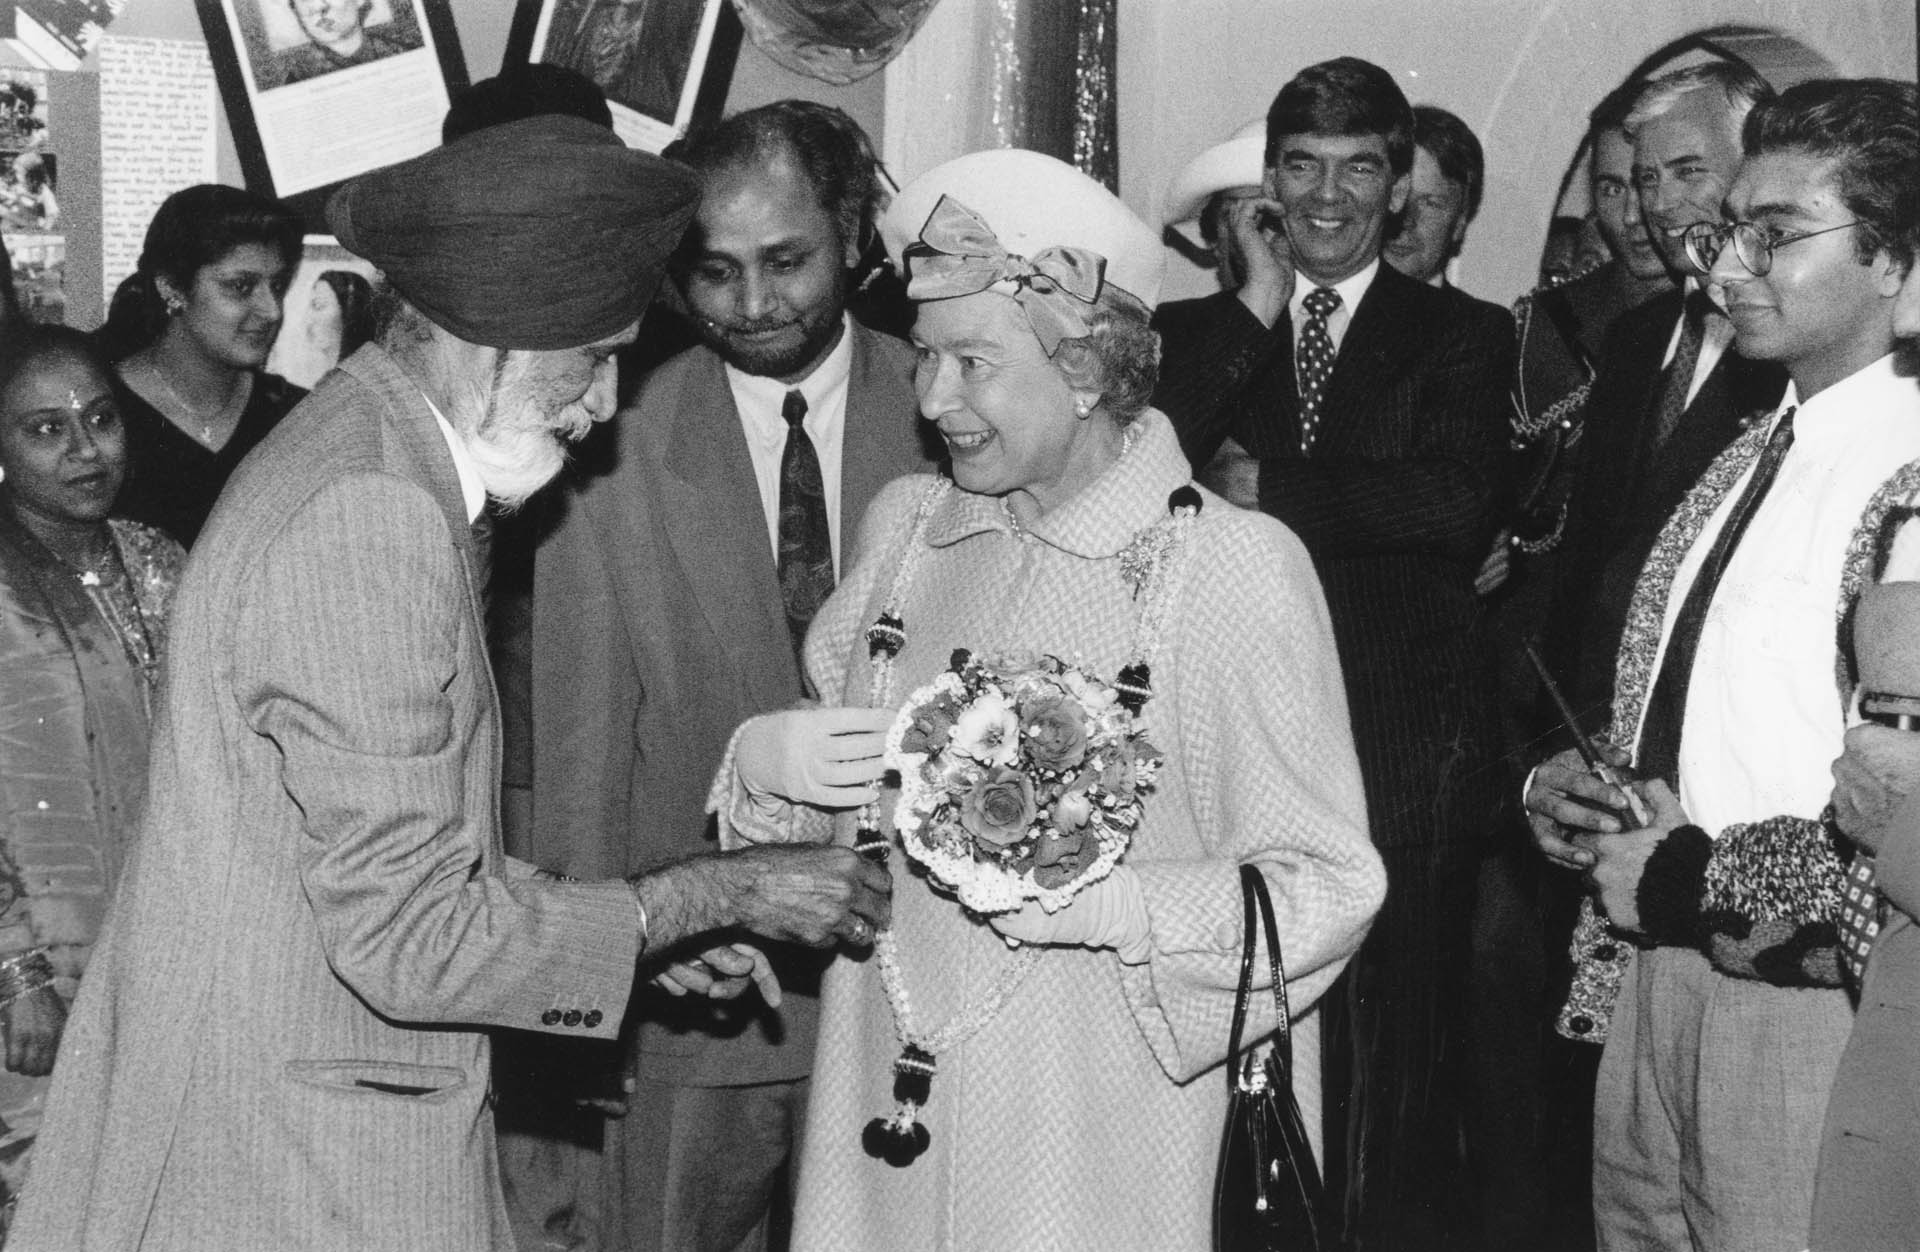 Mr Gurmer Singh presents The Queen with a garland at the Avalon Community project, watched by Mr Mahendra Solanki, head of the project, 1993 - Picture Courtesy Leicester Mercury